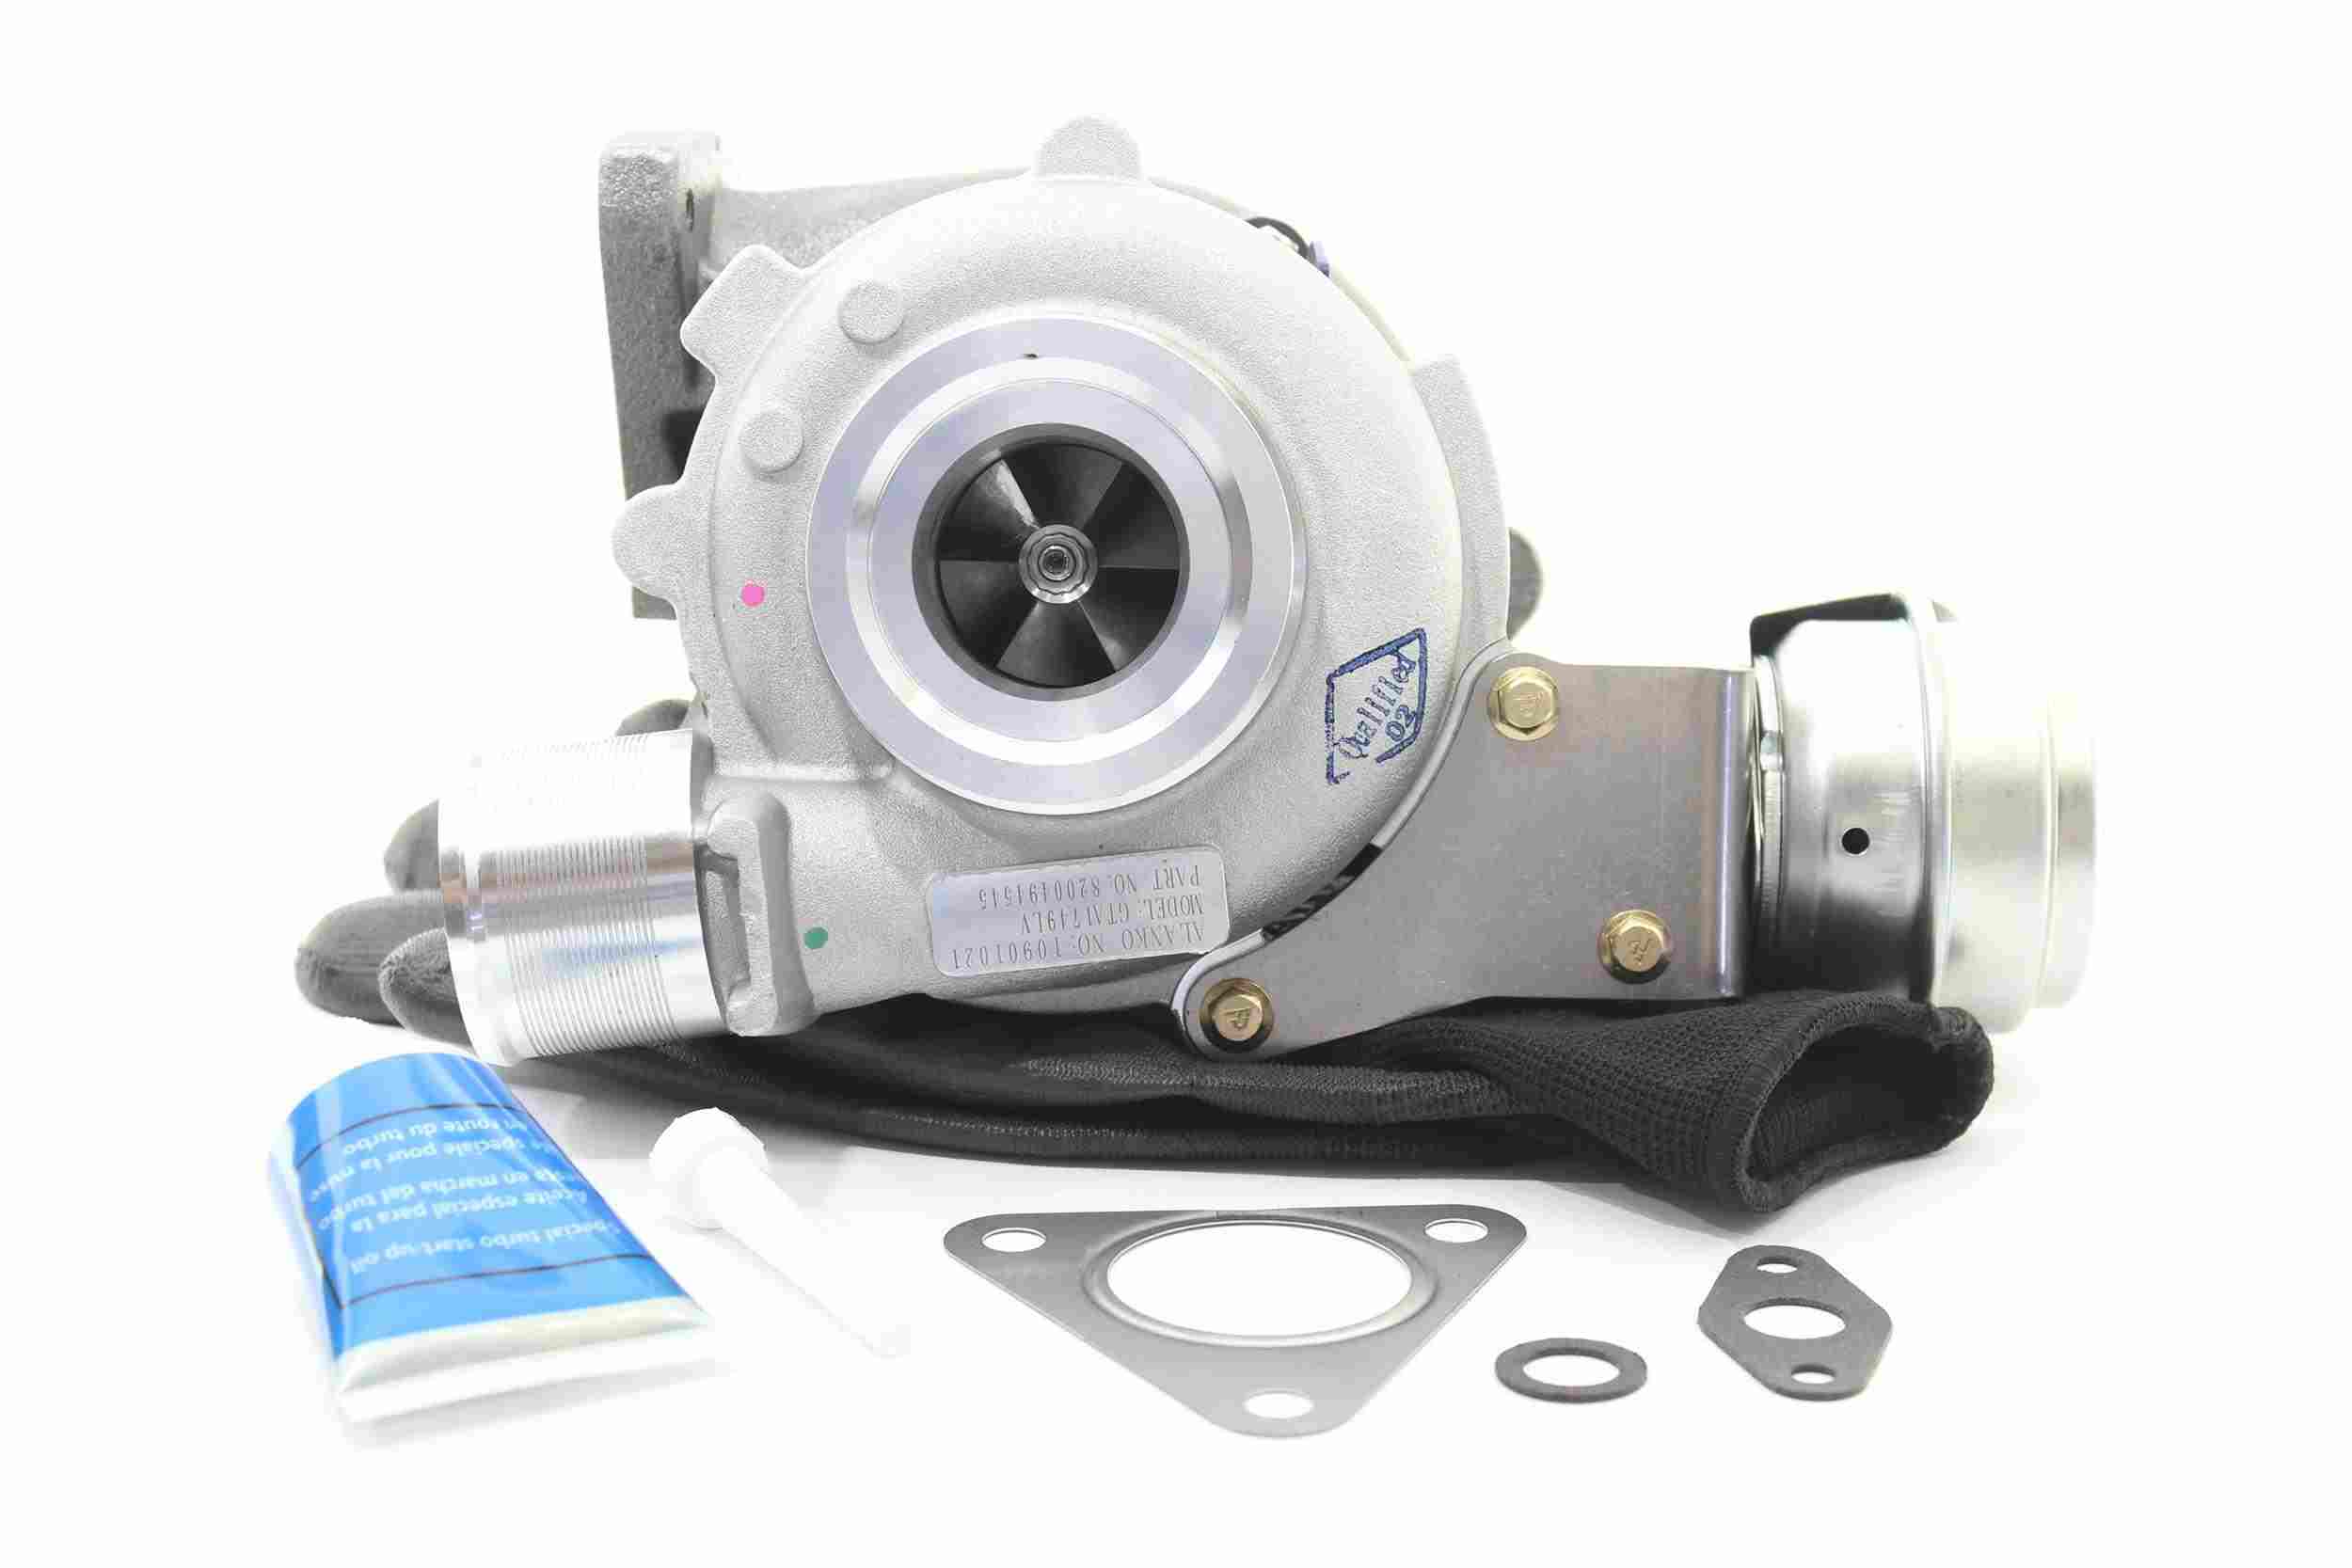 ALANKO 10901021 Turbocharger Exhaust Turbocharger, Incl. Gasket Set, with attachment material